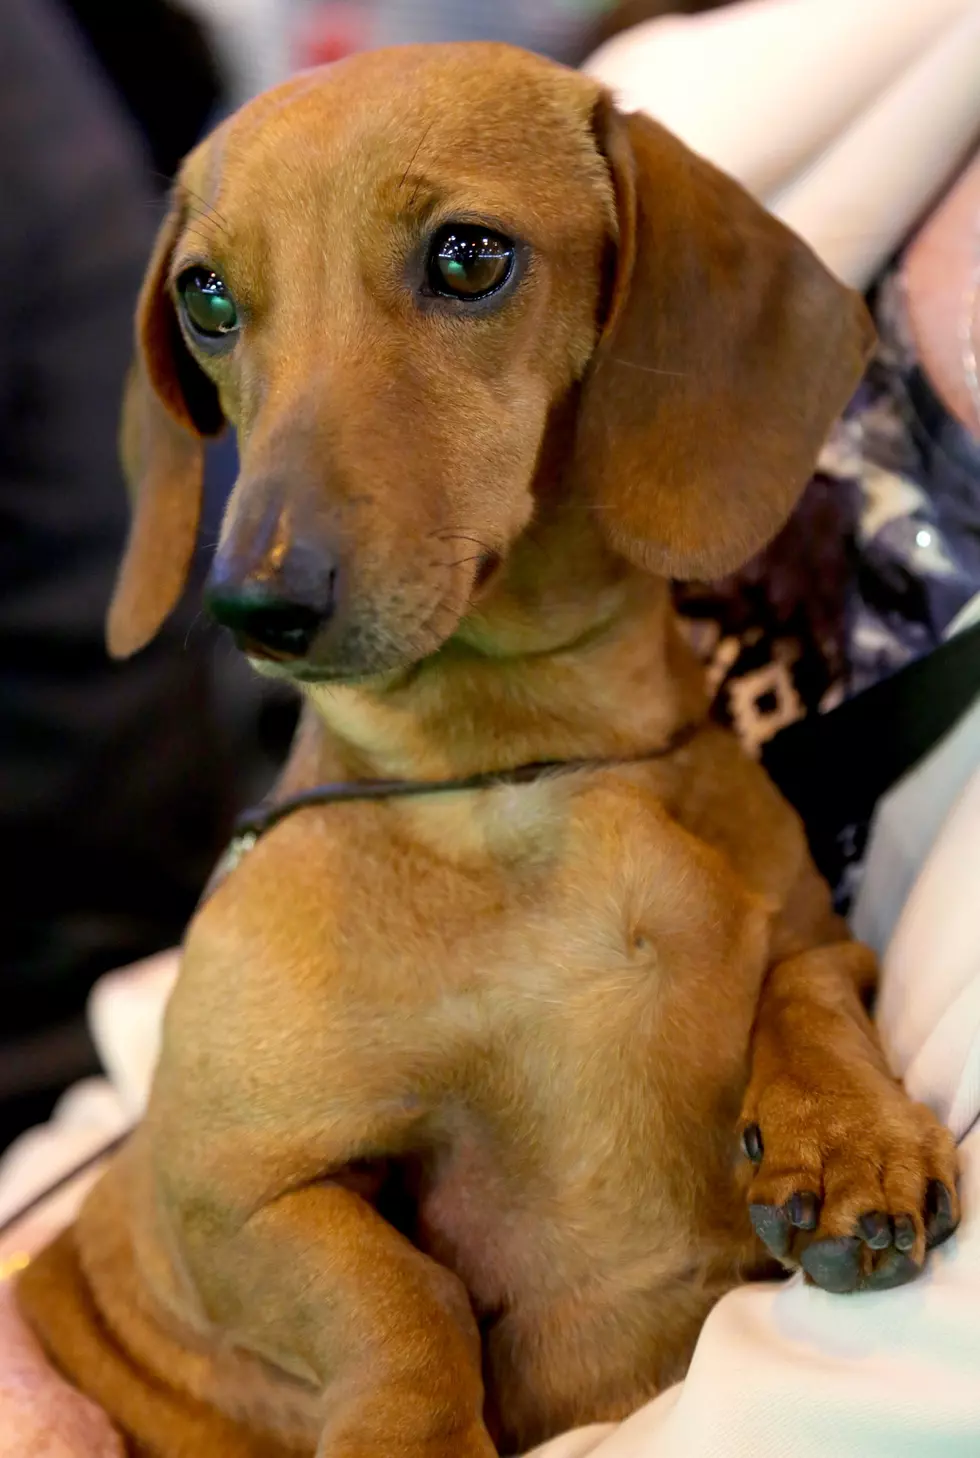 Having A Bad Day? Watch This Singing Wiener Dog [VIDEO]